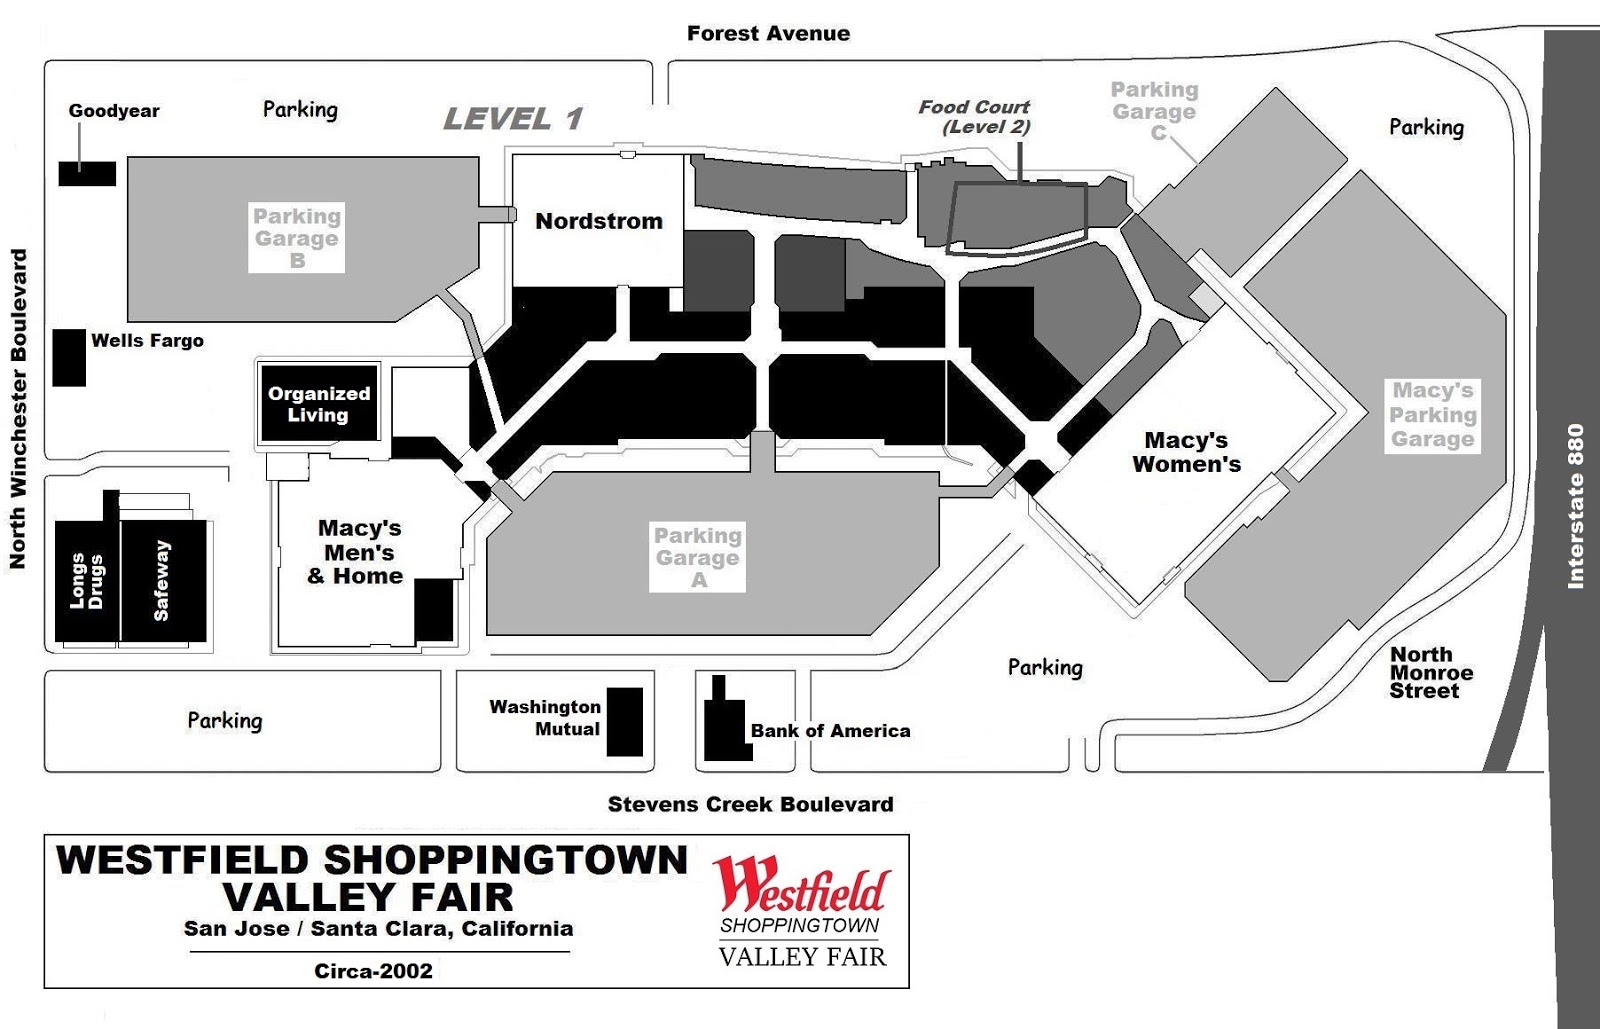 Floor plans of Westfield Valley Fair mall in San Jose, CA, if anyone was  curious about an in-depth view of these kinds of malls. : r/malls